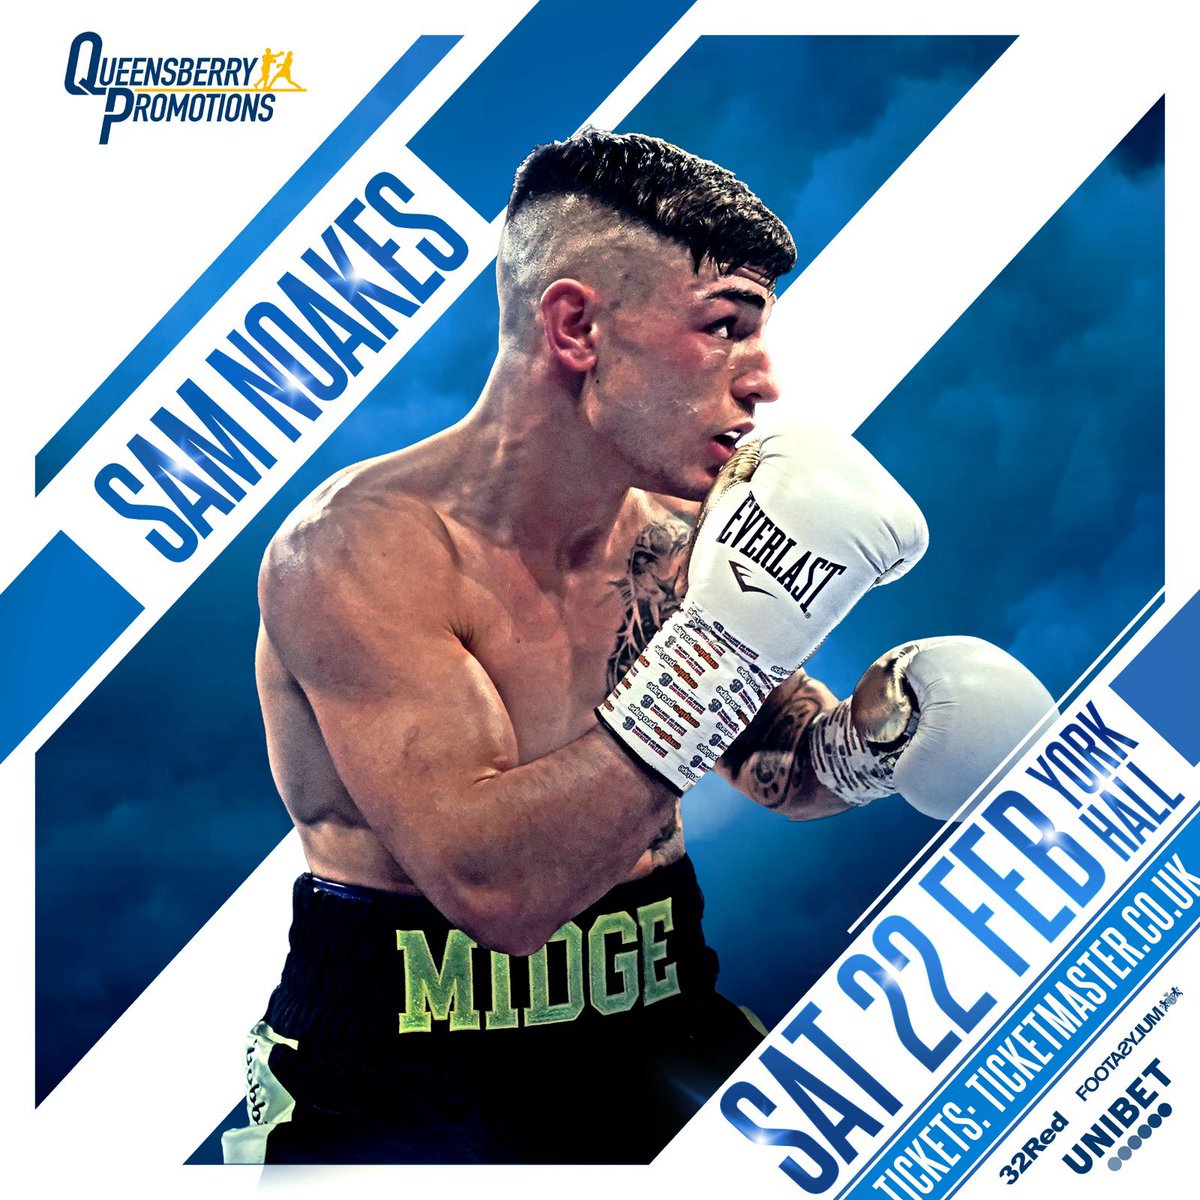 🙌 MAIDSTONE MASSIVE COMING TO YORK HALL 🙌

Popular Maidstone lightweight Sam Noakes (2-0) will bring his barmy army to London again on February 22nd 👊

#Midge #SamNoakes